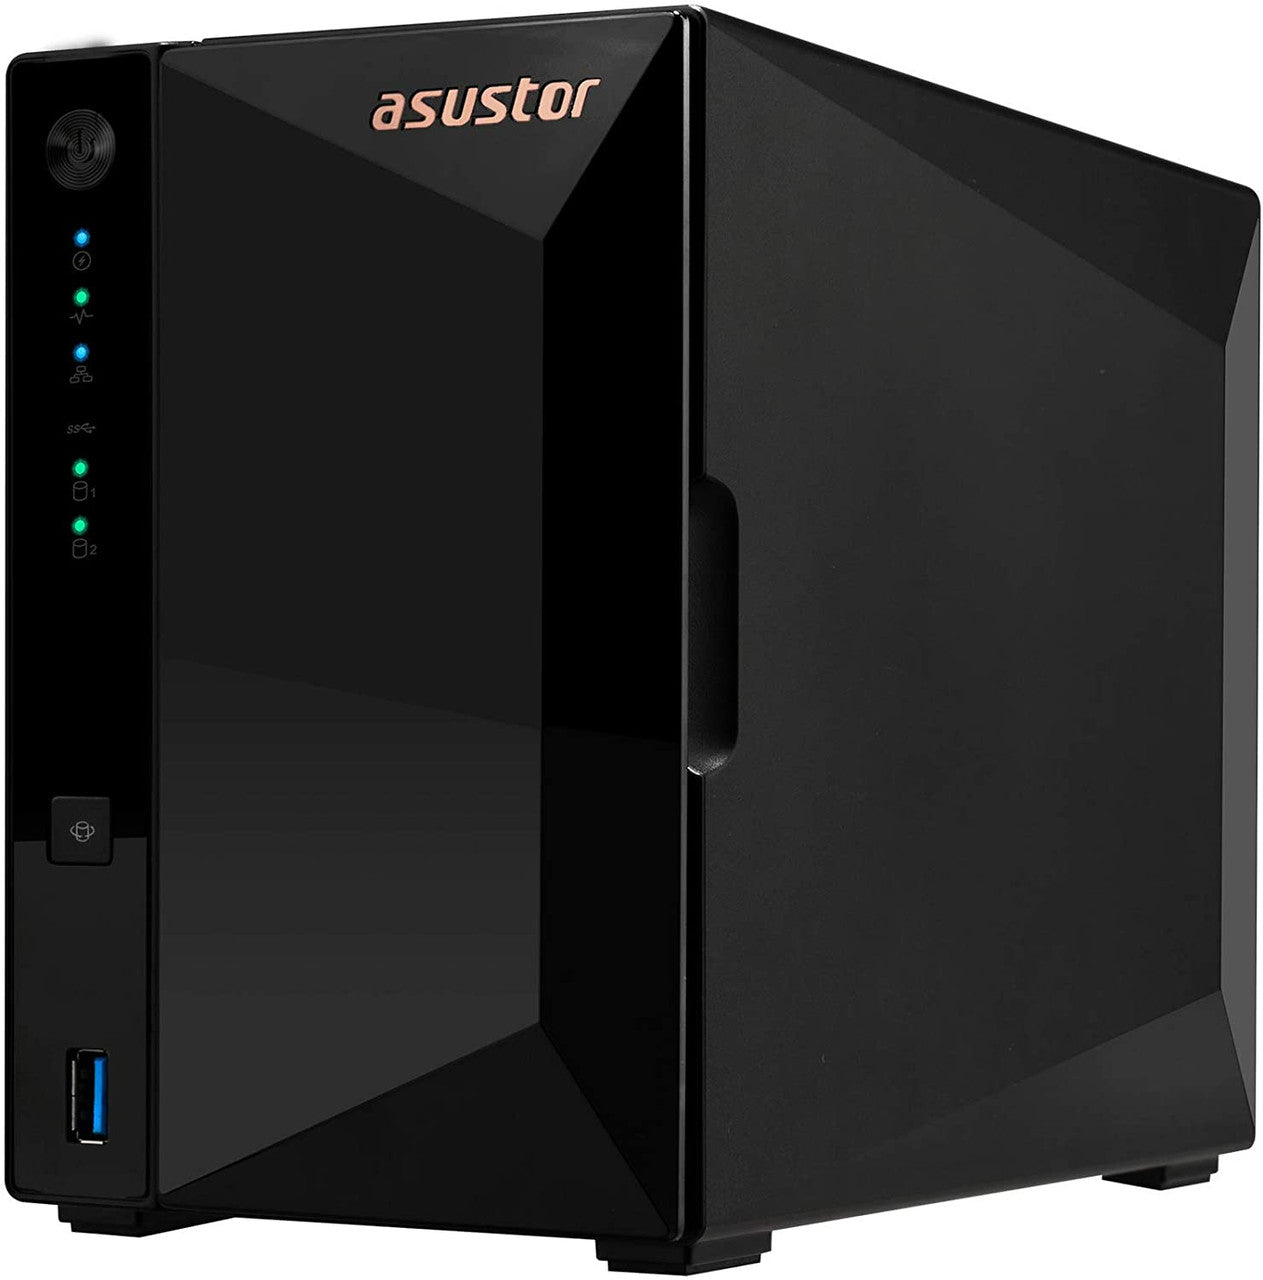 Asustor AS3302T 2-Bay Drivestor 2 PRO NAS with 2GB RAM and 8TB (2x4TB) Seagate Ironwolf NAS Drives Fully Assembled and Tested